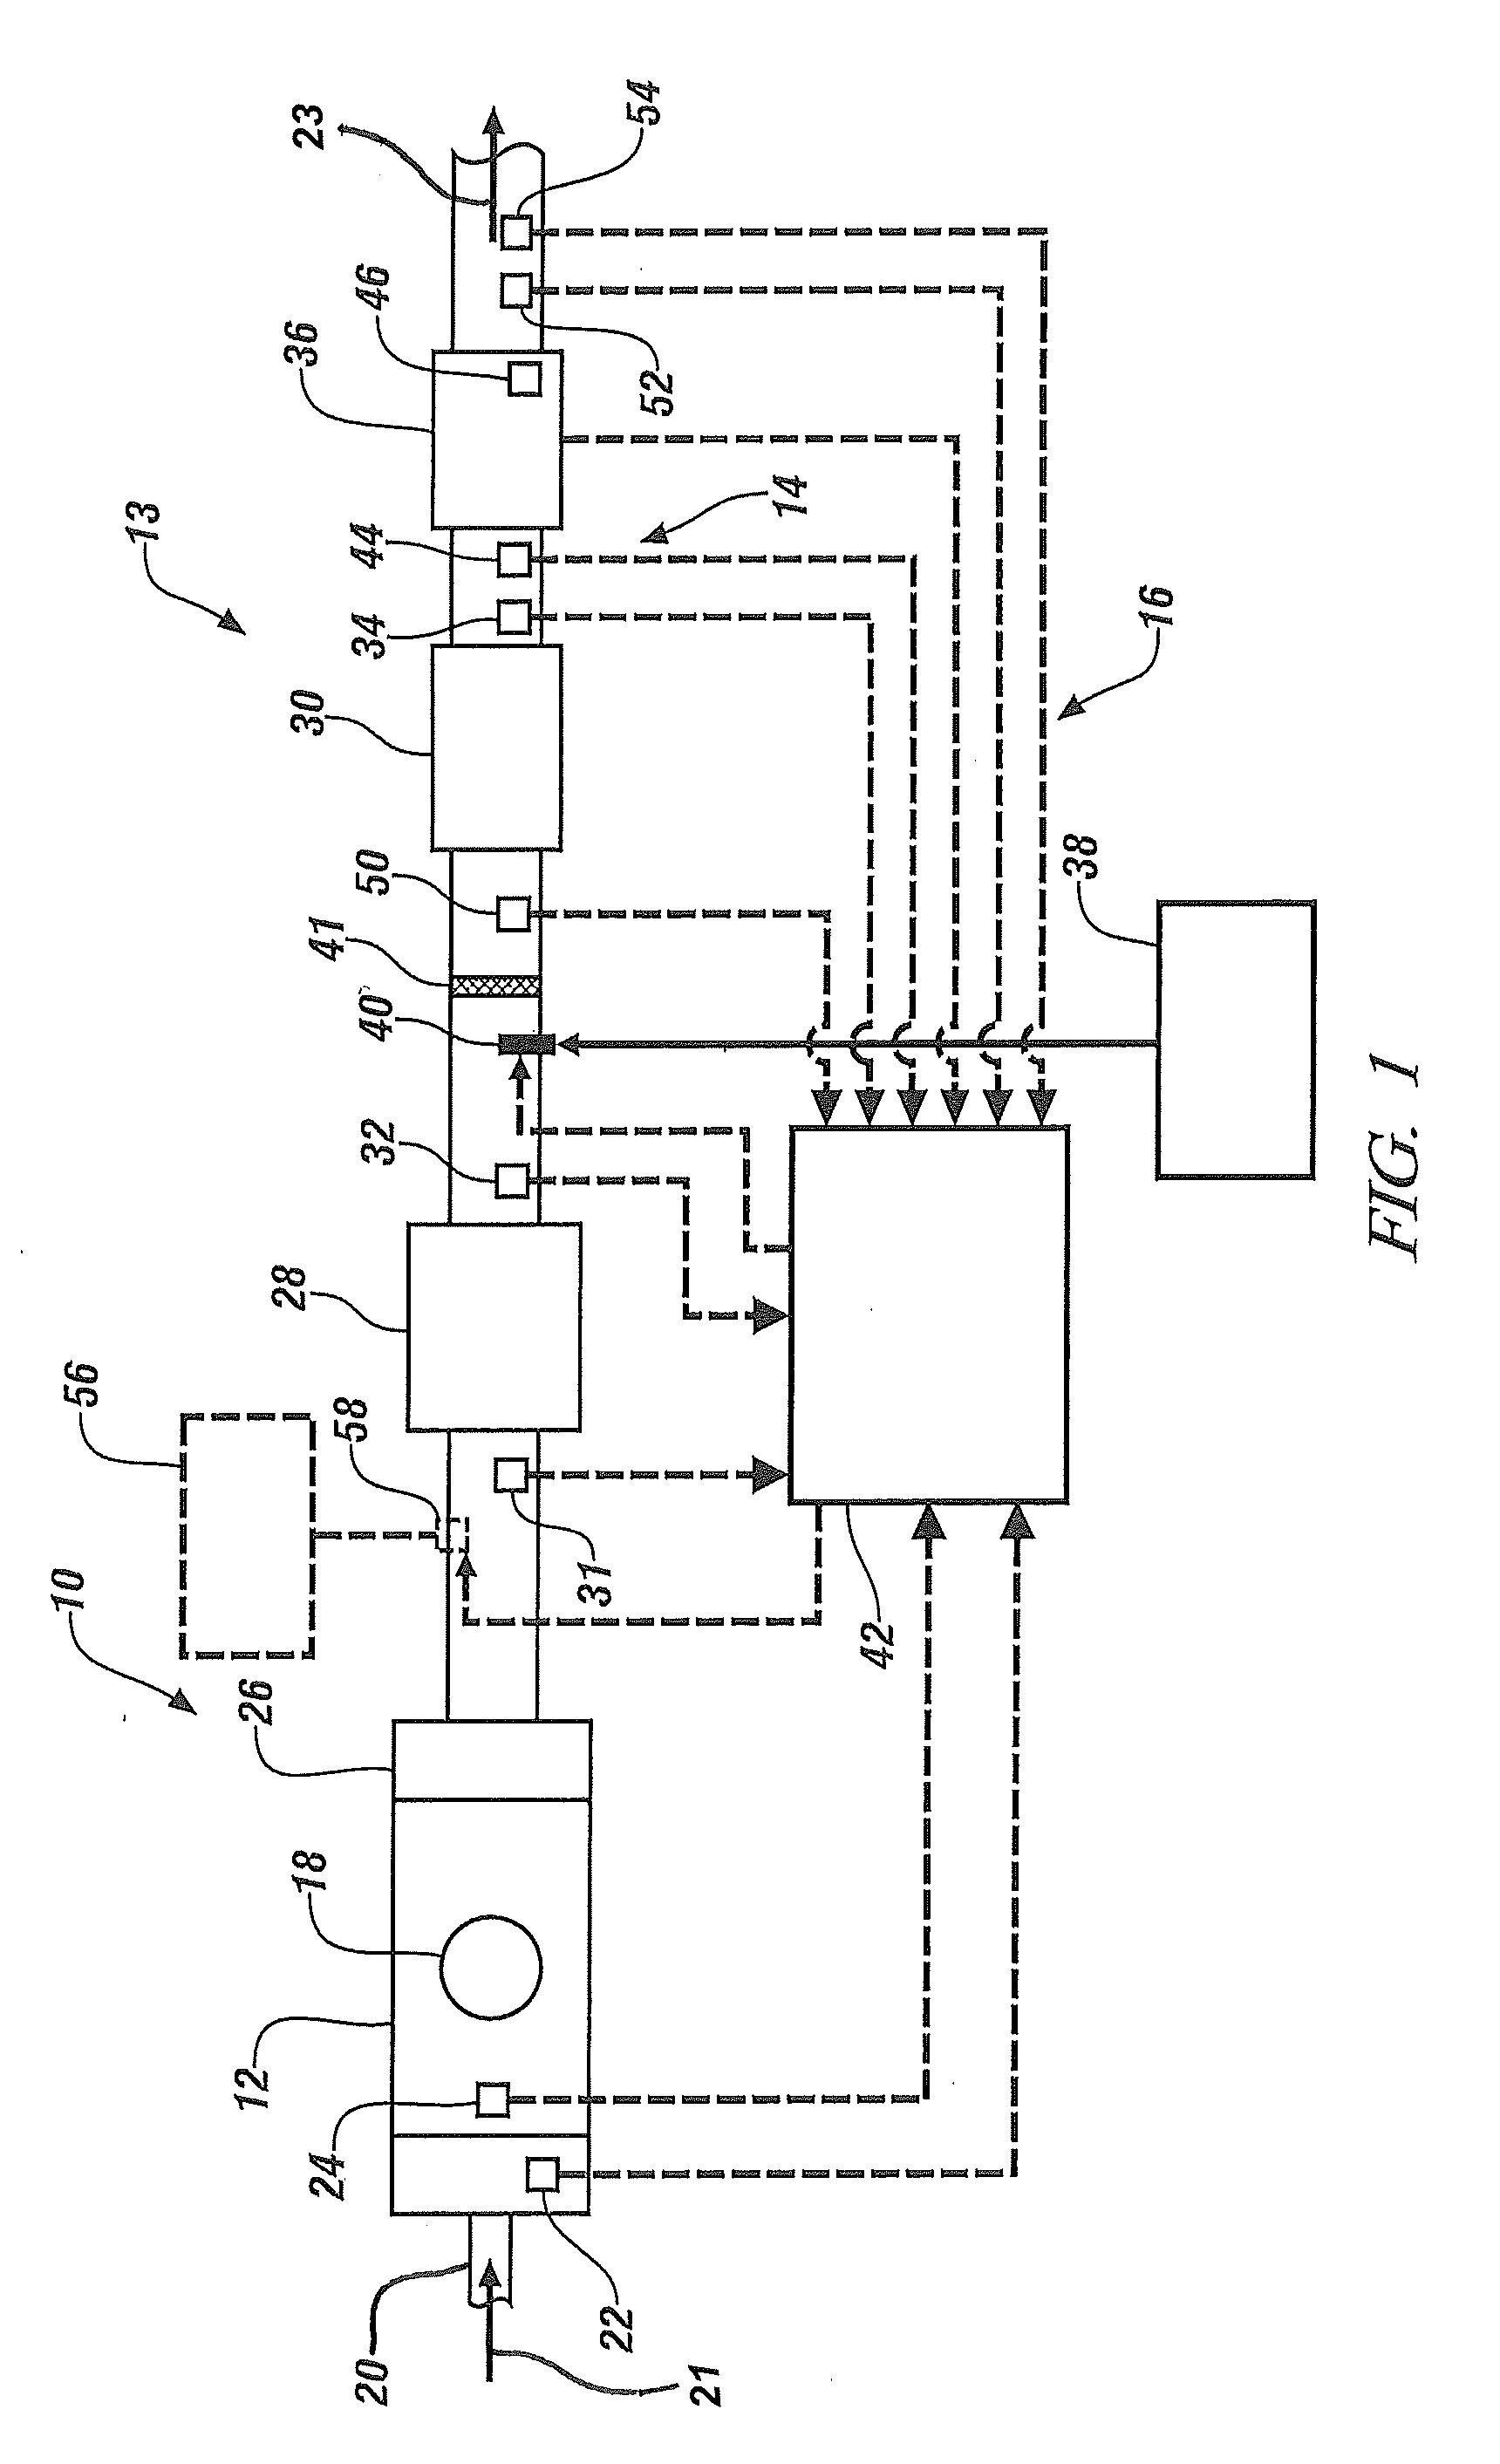 Exhaust diagnostic system and method with scr nh3 depletion cleansing mode for initial step in the def quality service healing test